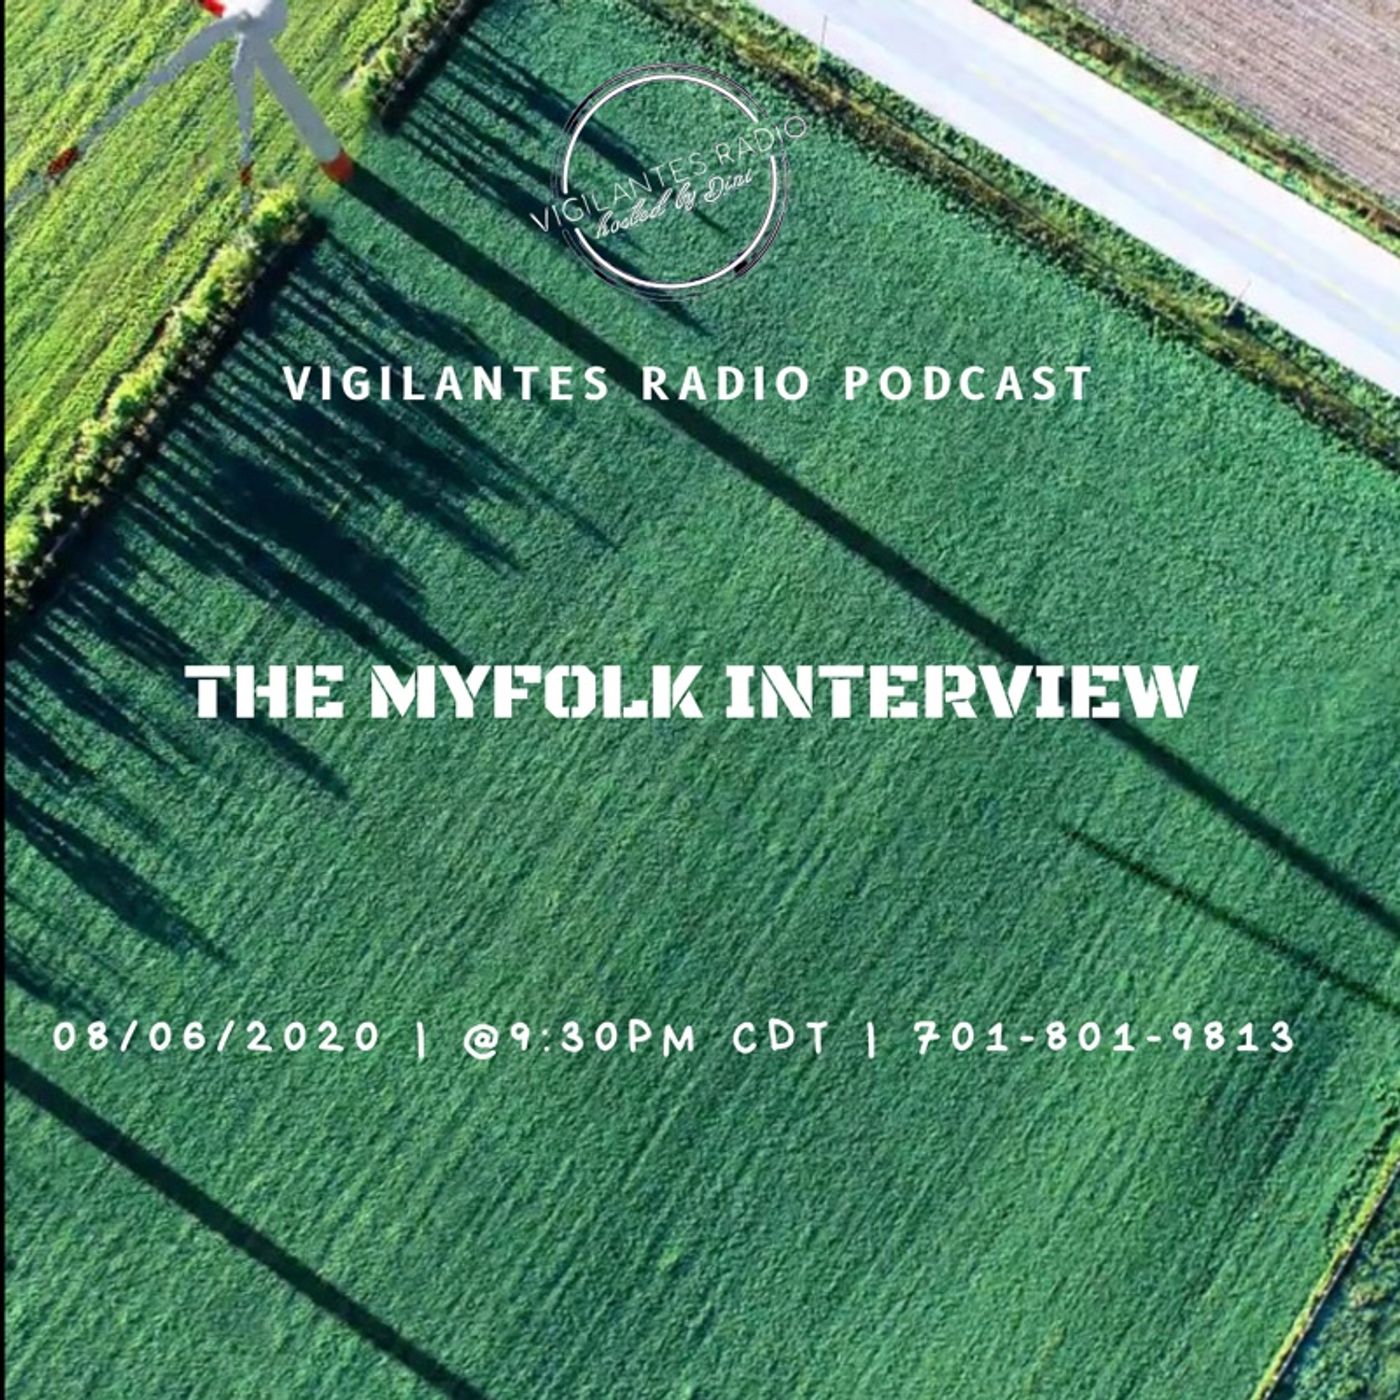 The MyFolk Interview. Image